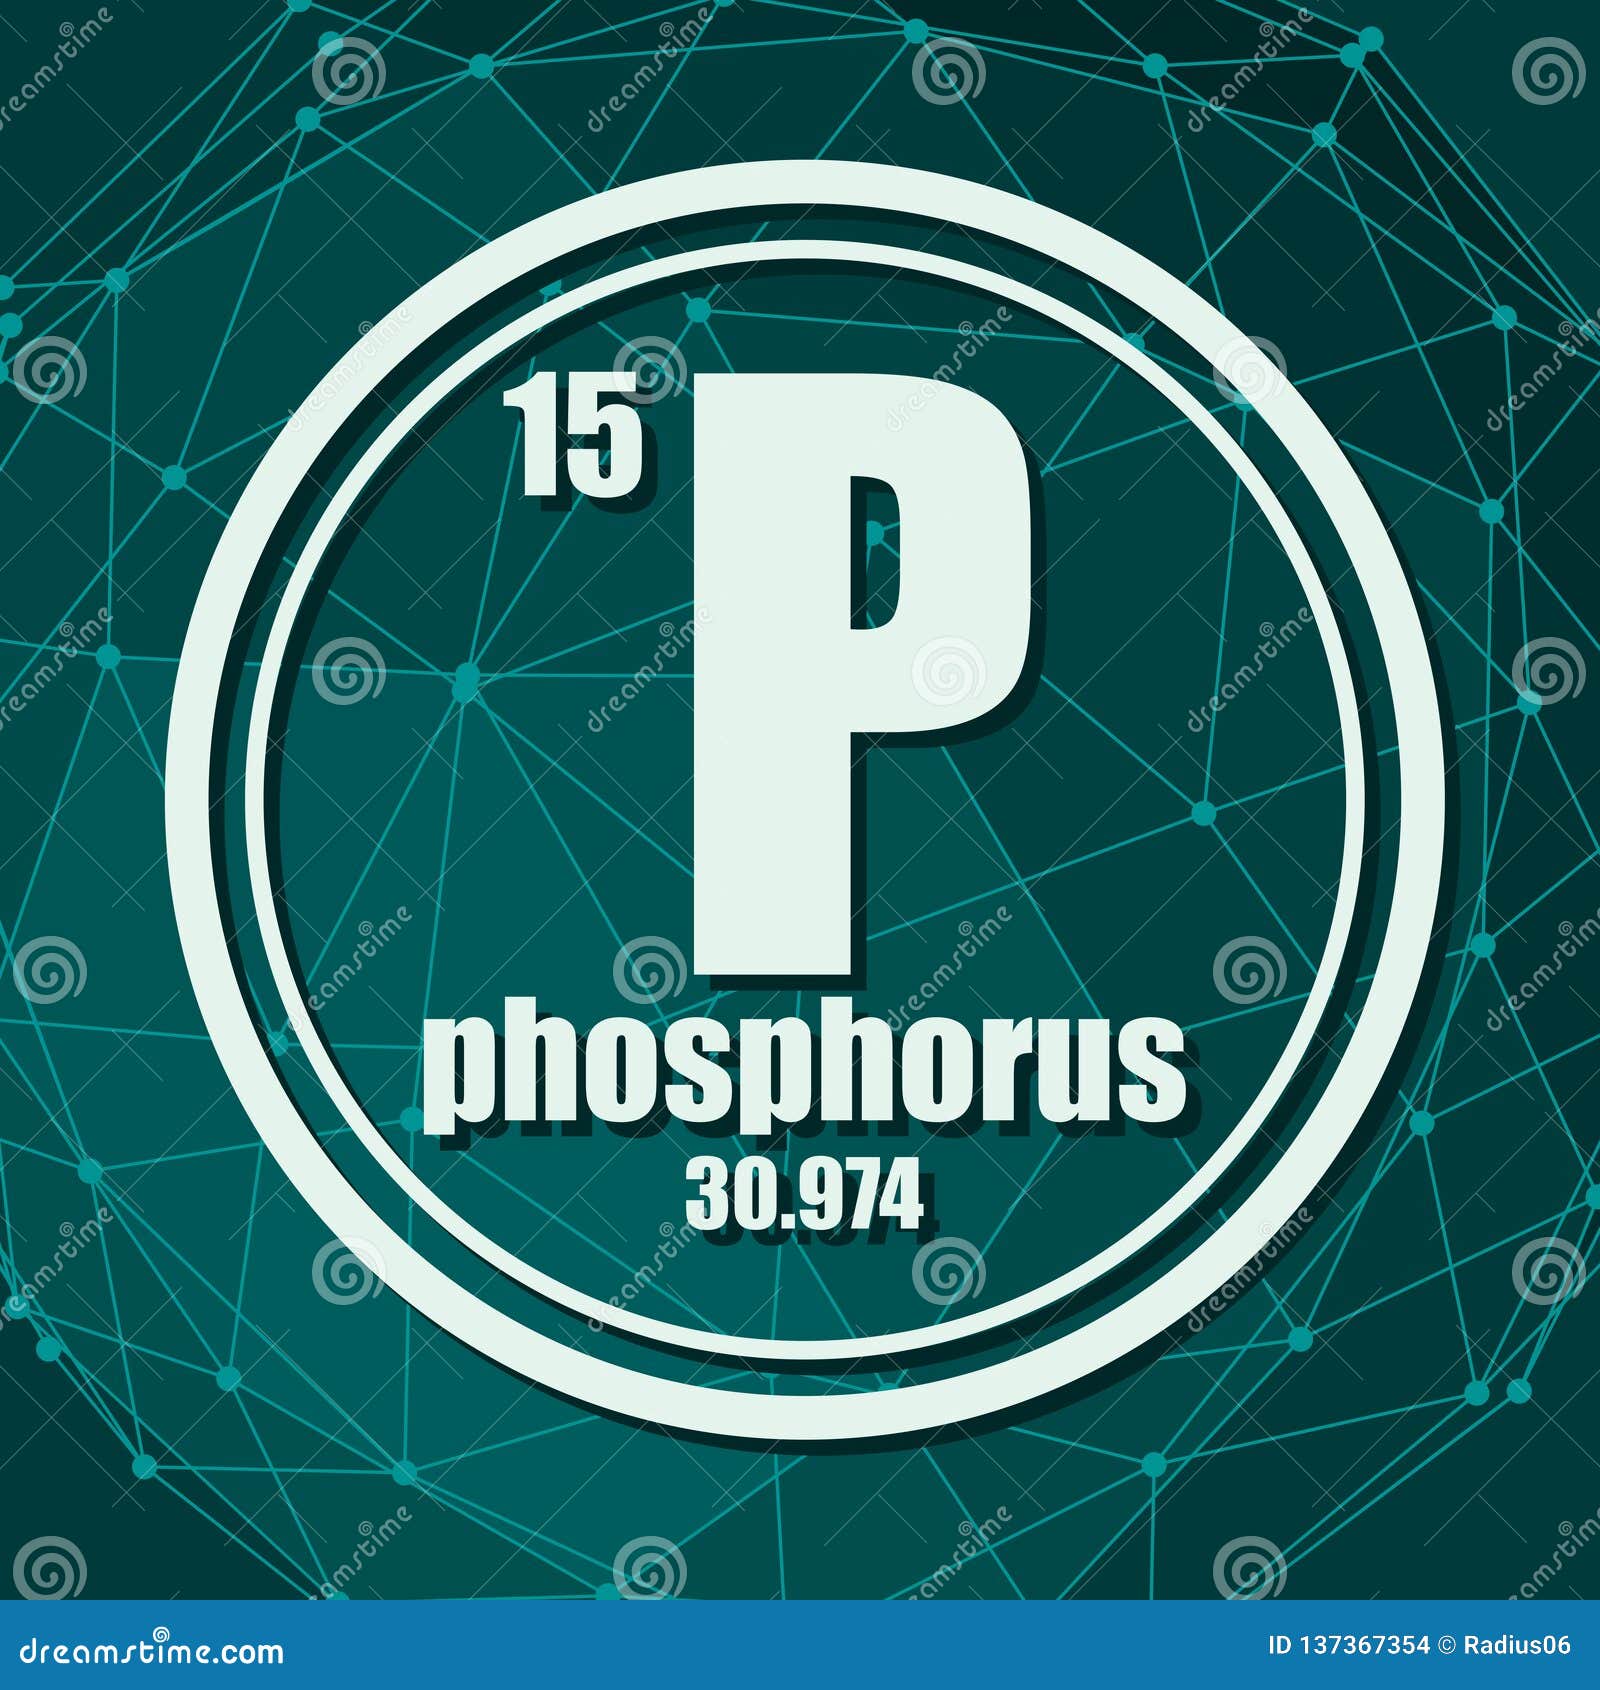 Phosphorus Chemical Symbol As In The Periodic Table Royalty Free